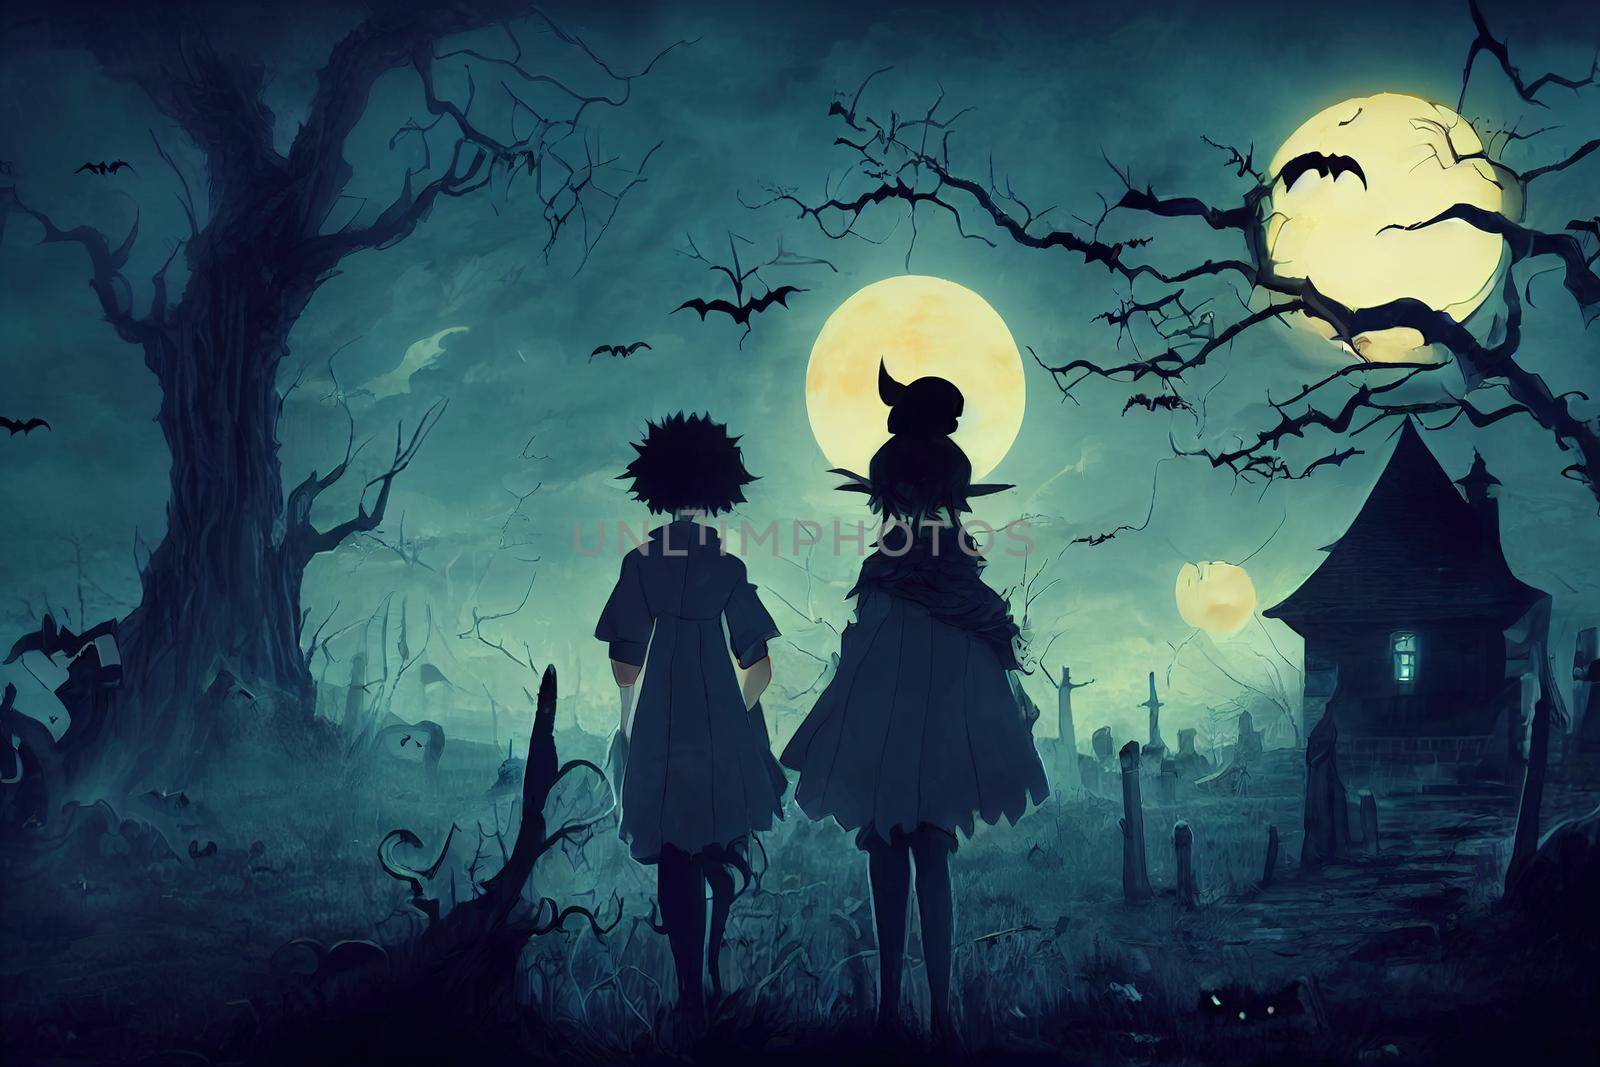 male and female anime 2d characters in dark halloween night. High quality 3d illustration